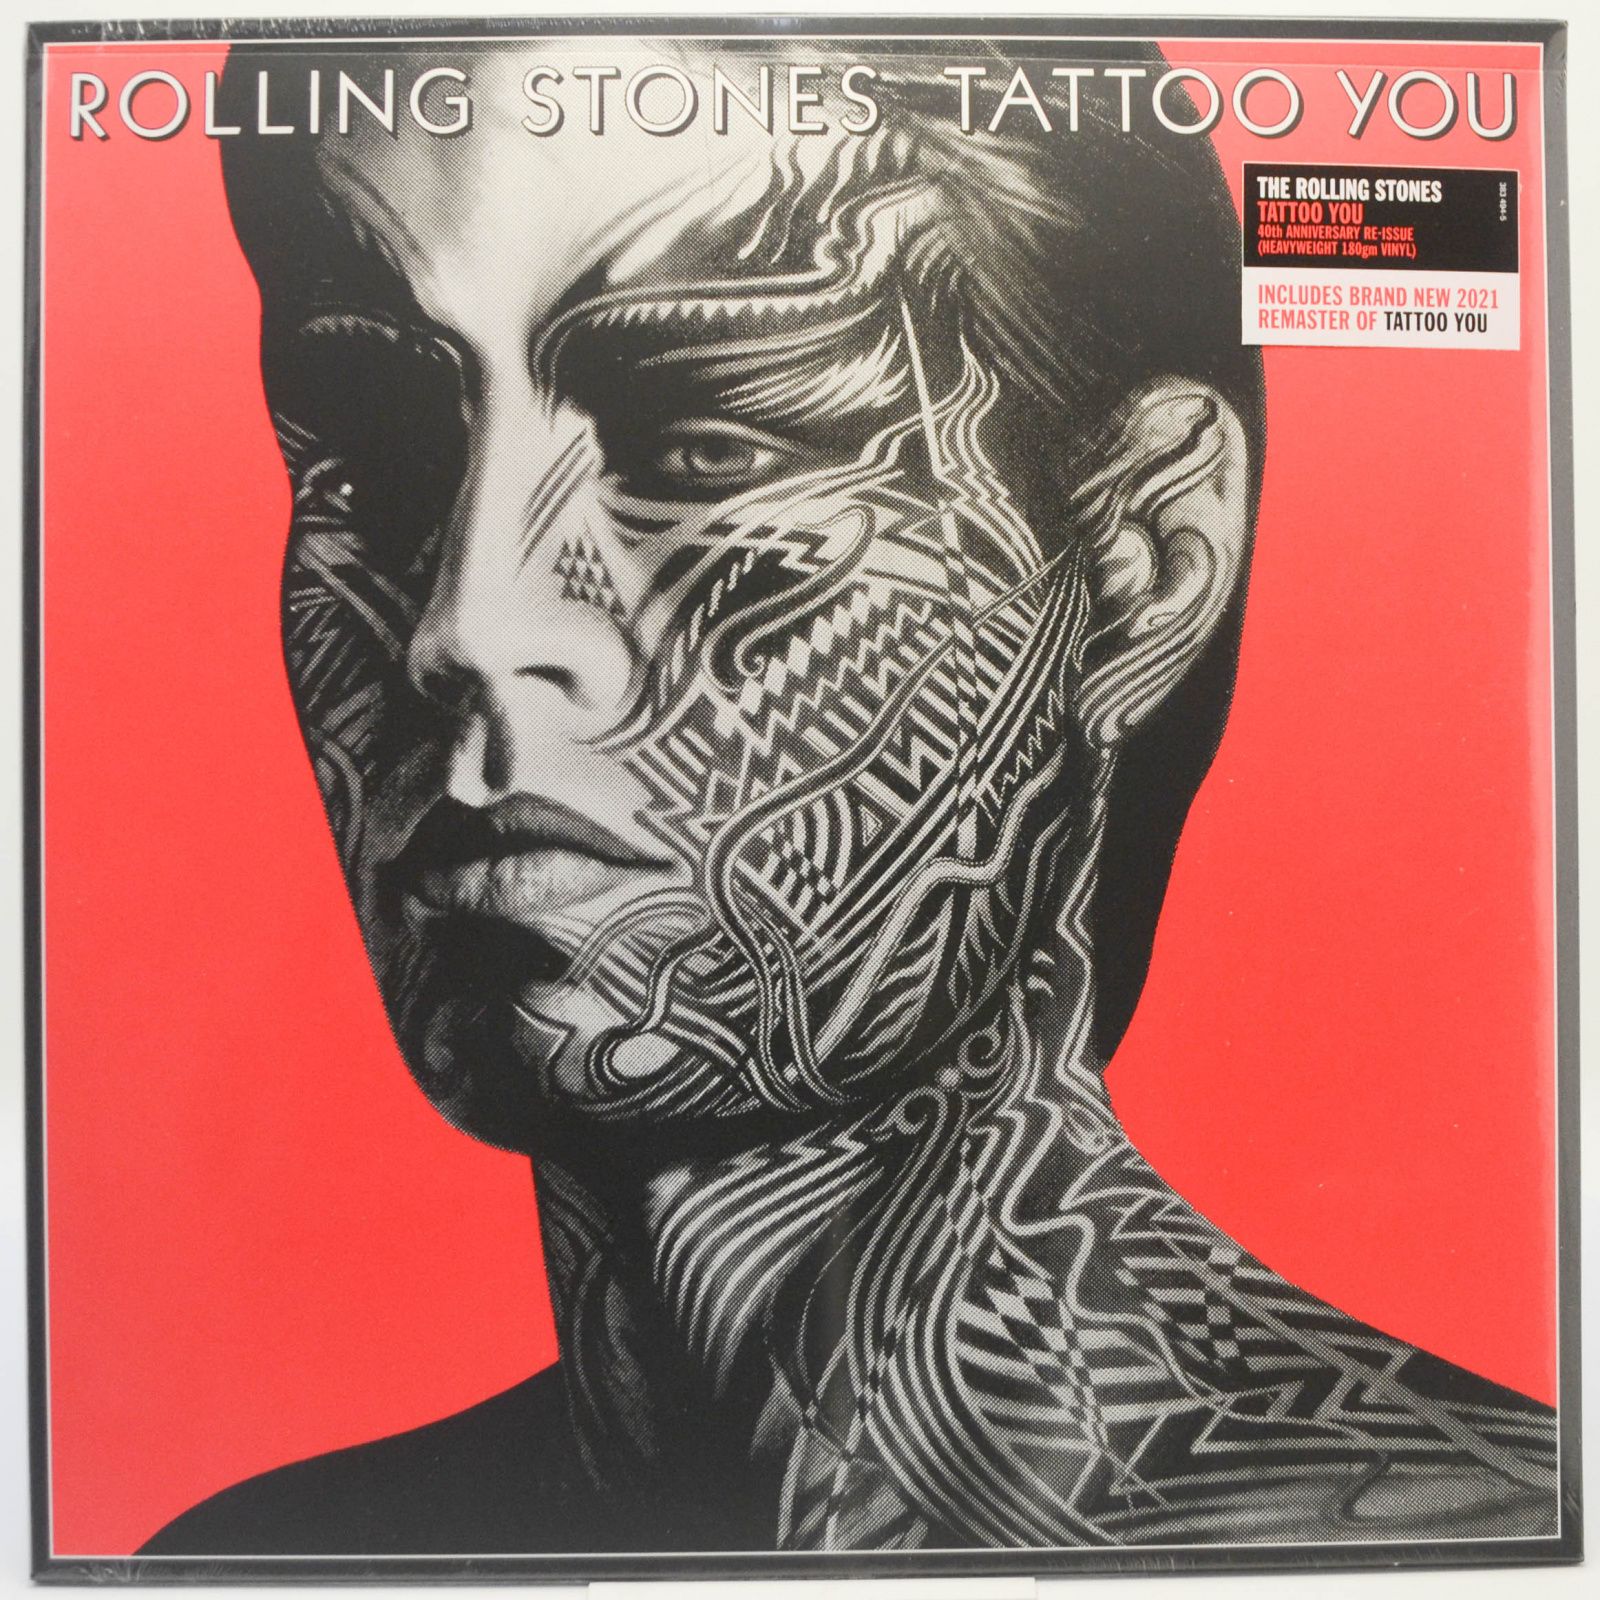 Rolling Stones — Tattoo You, 1981